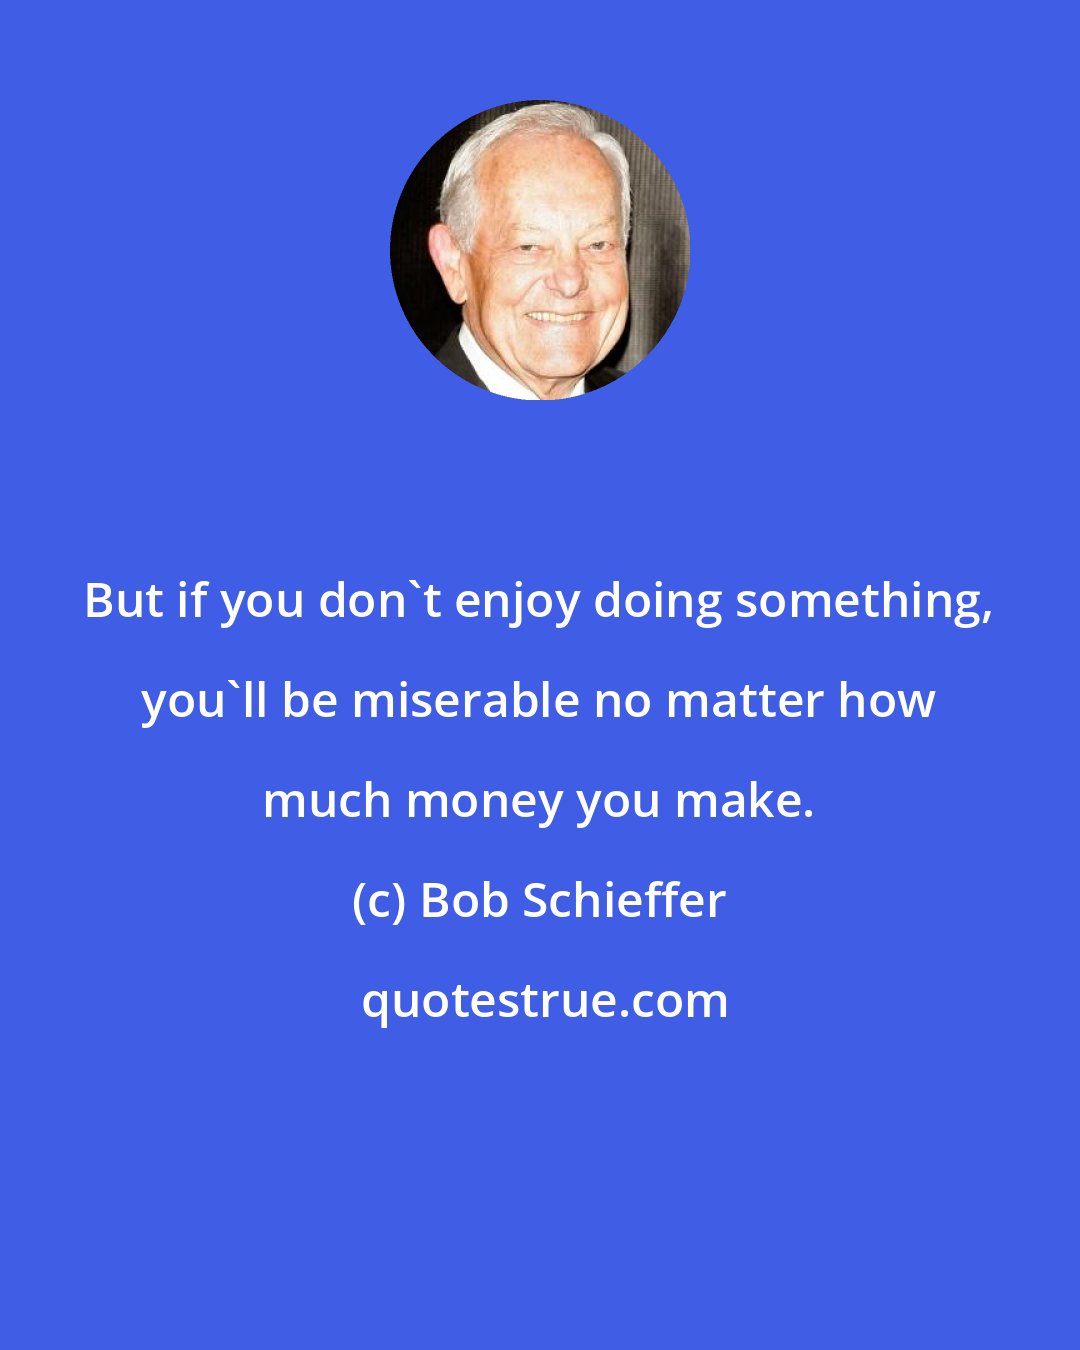 Bob Schieffer: But if you don't enjoy doing something, you'll be miserable no matter how much money you make.